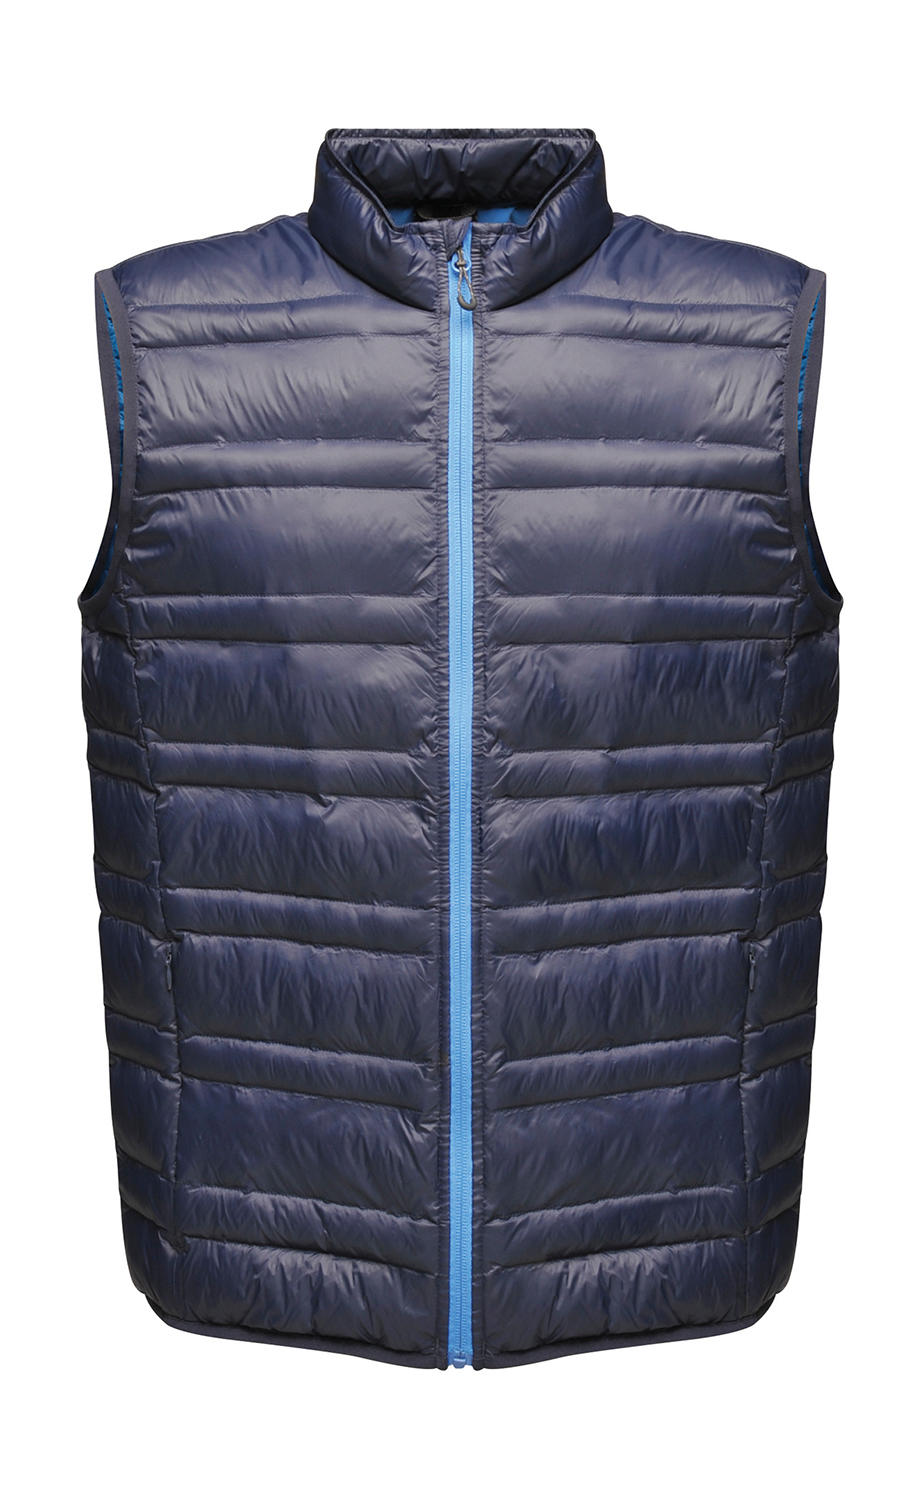  Firedown Down-Touch Bodywarmer in Farbe Navy/French Blue